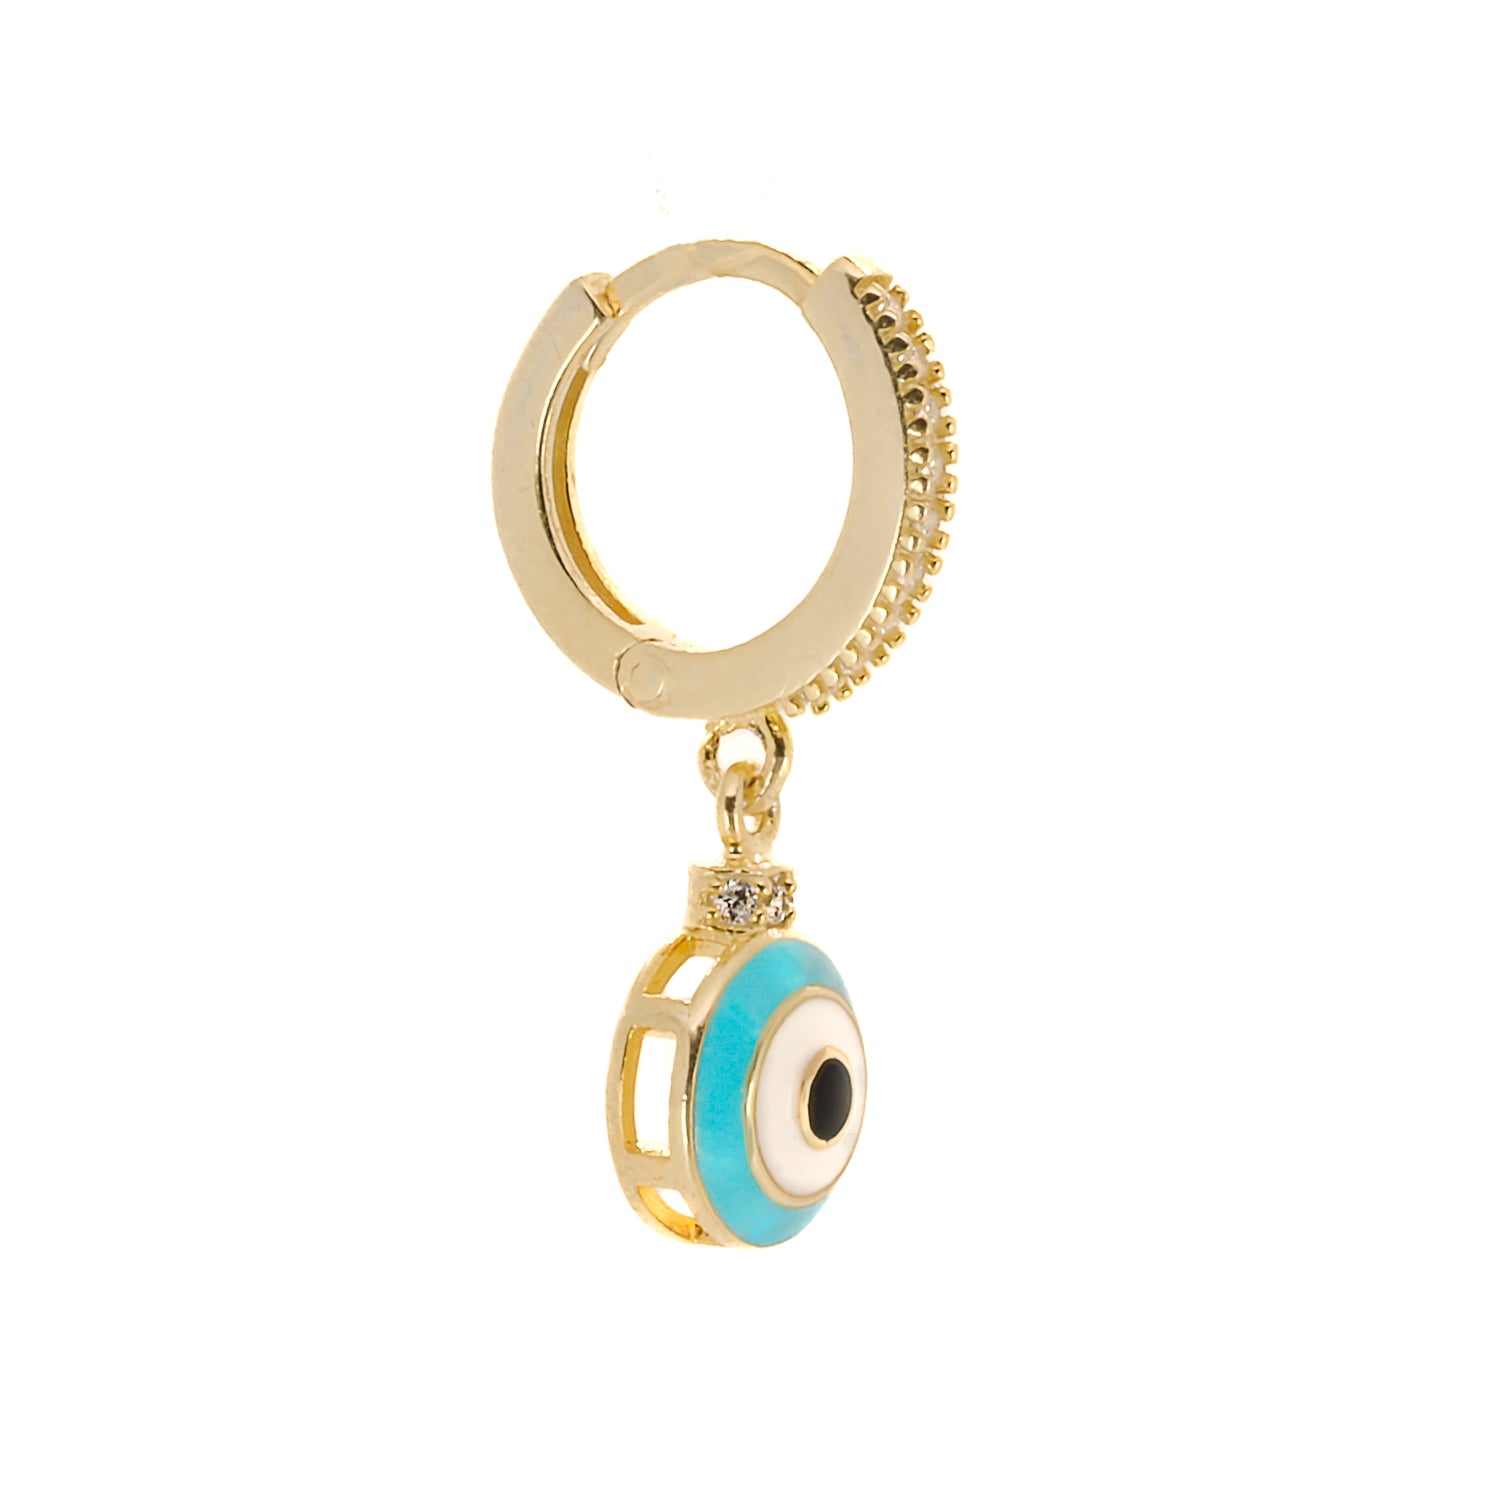 Handmade gold-plated earrings featuring a delicate turquoise evil eye design